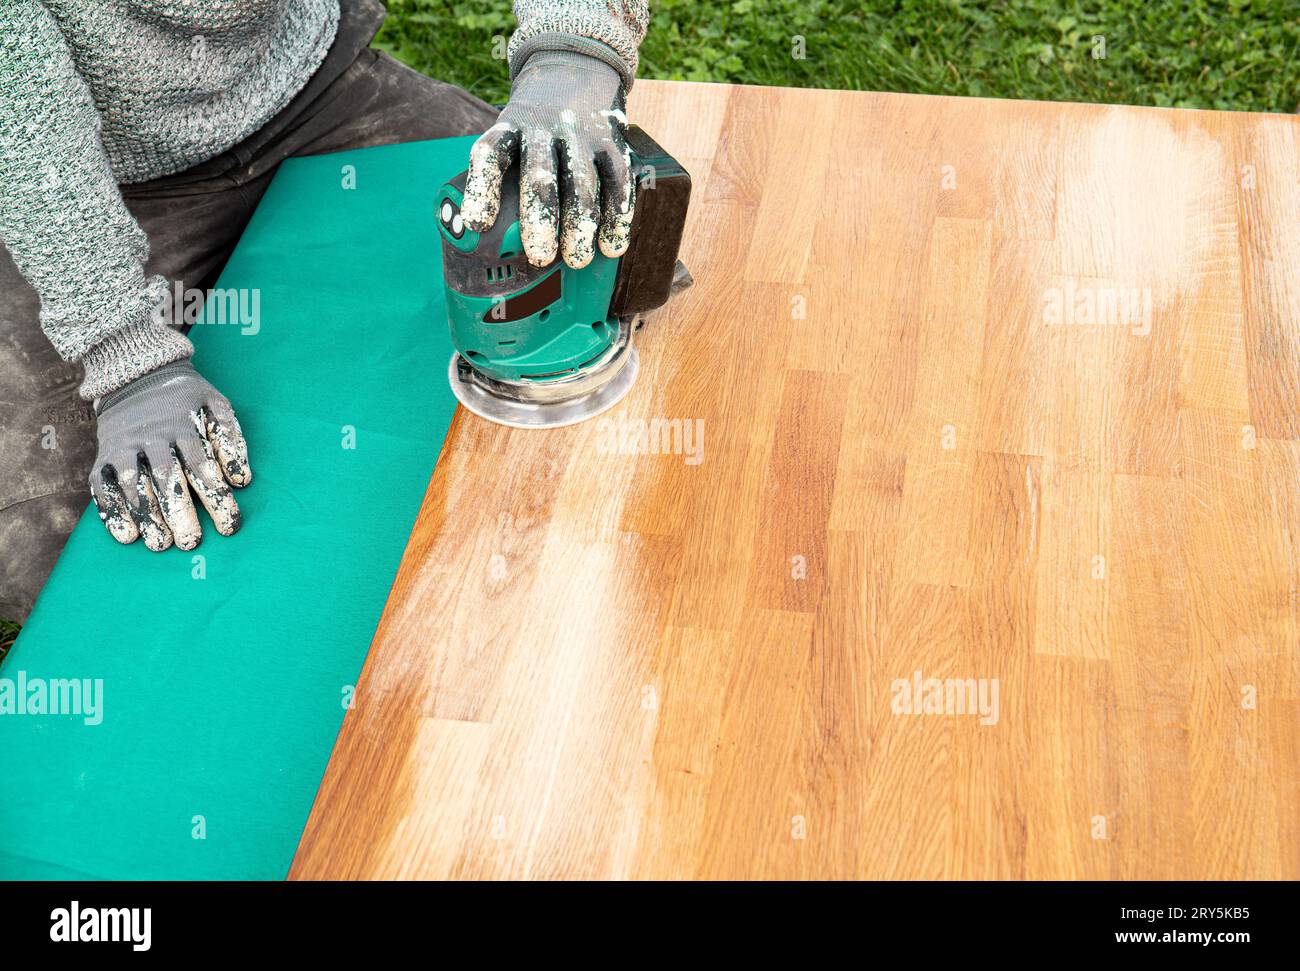 Close up view of person working with sander tool, sanding off stains on old damaged butcher block on oiled wood table. Renovation concept. Stock Photo